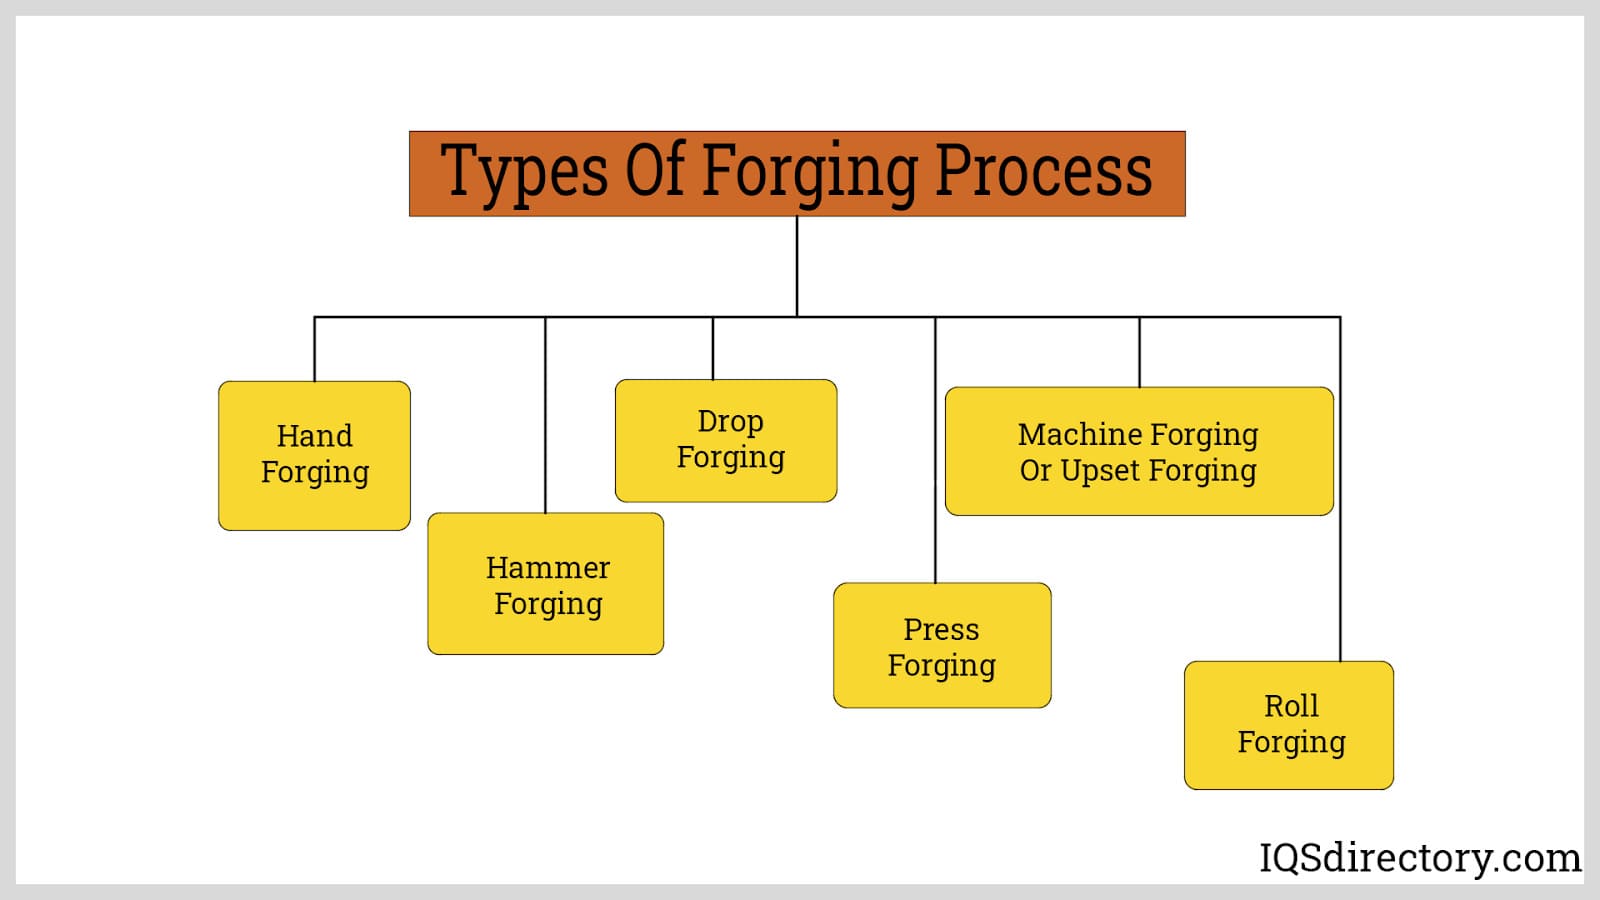 Types of Forging Process